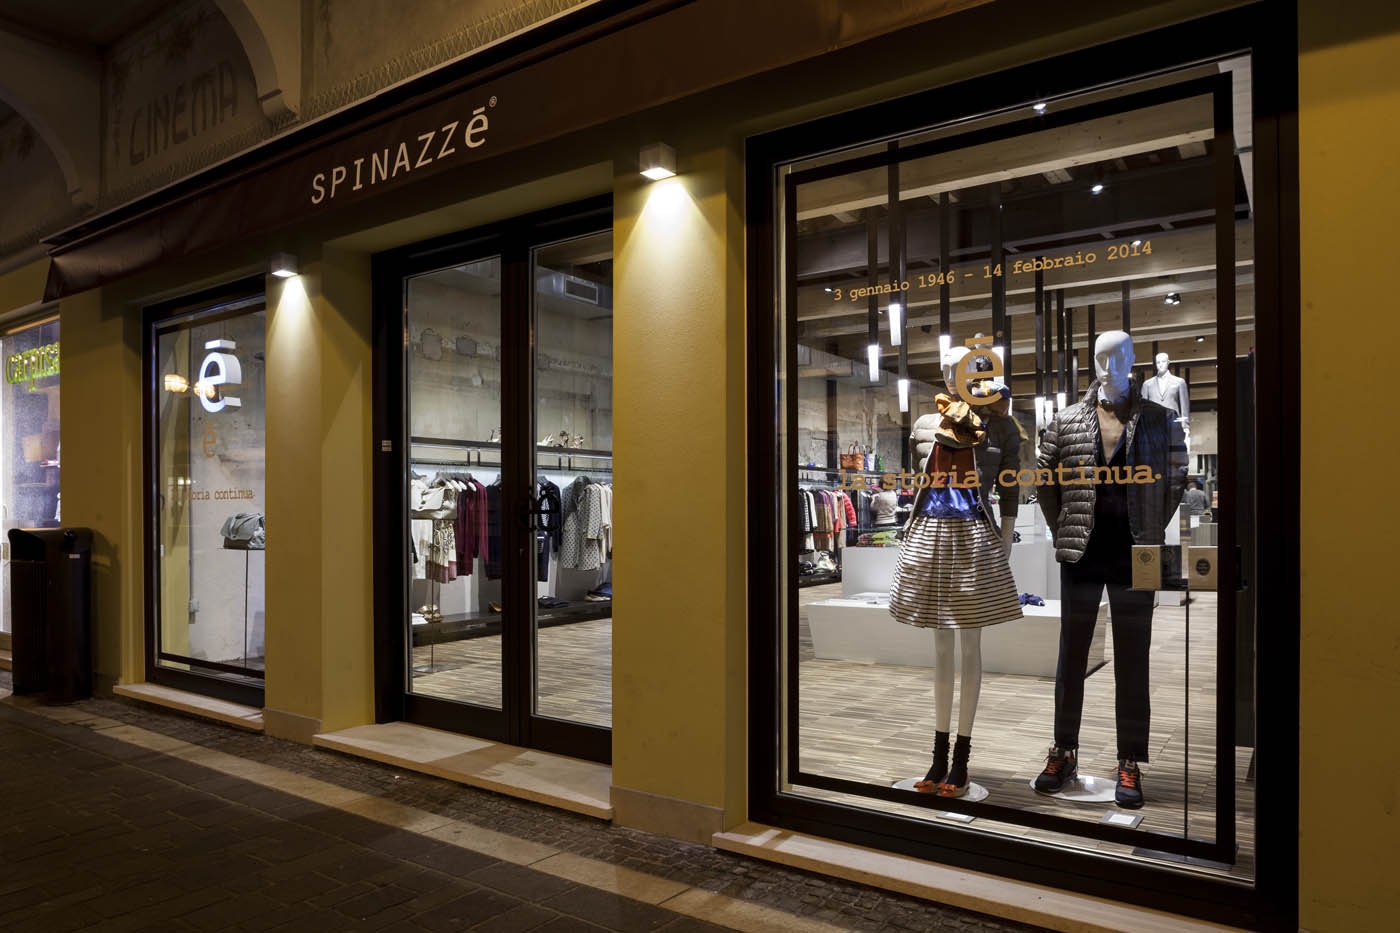 New Spinazzè 26